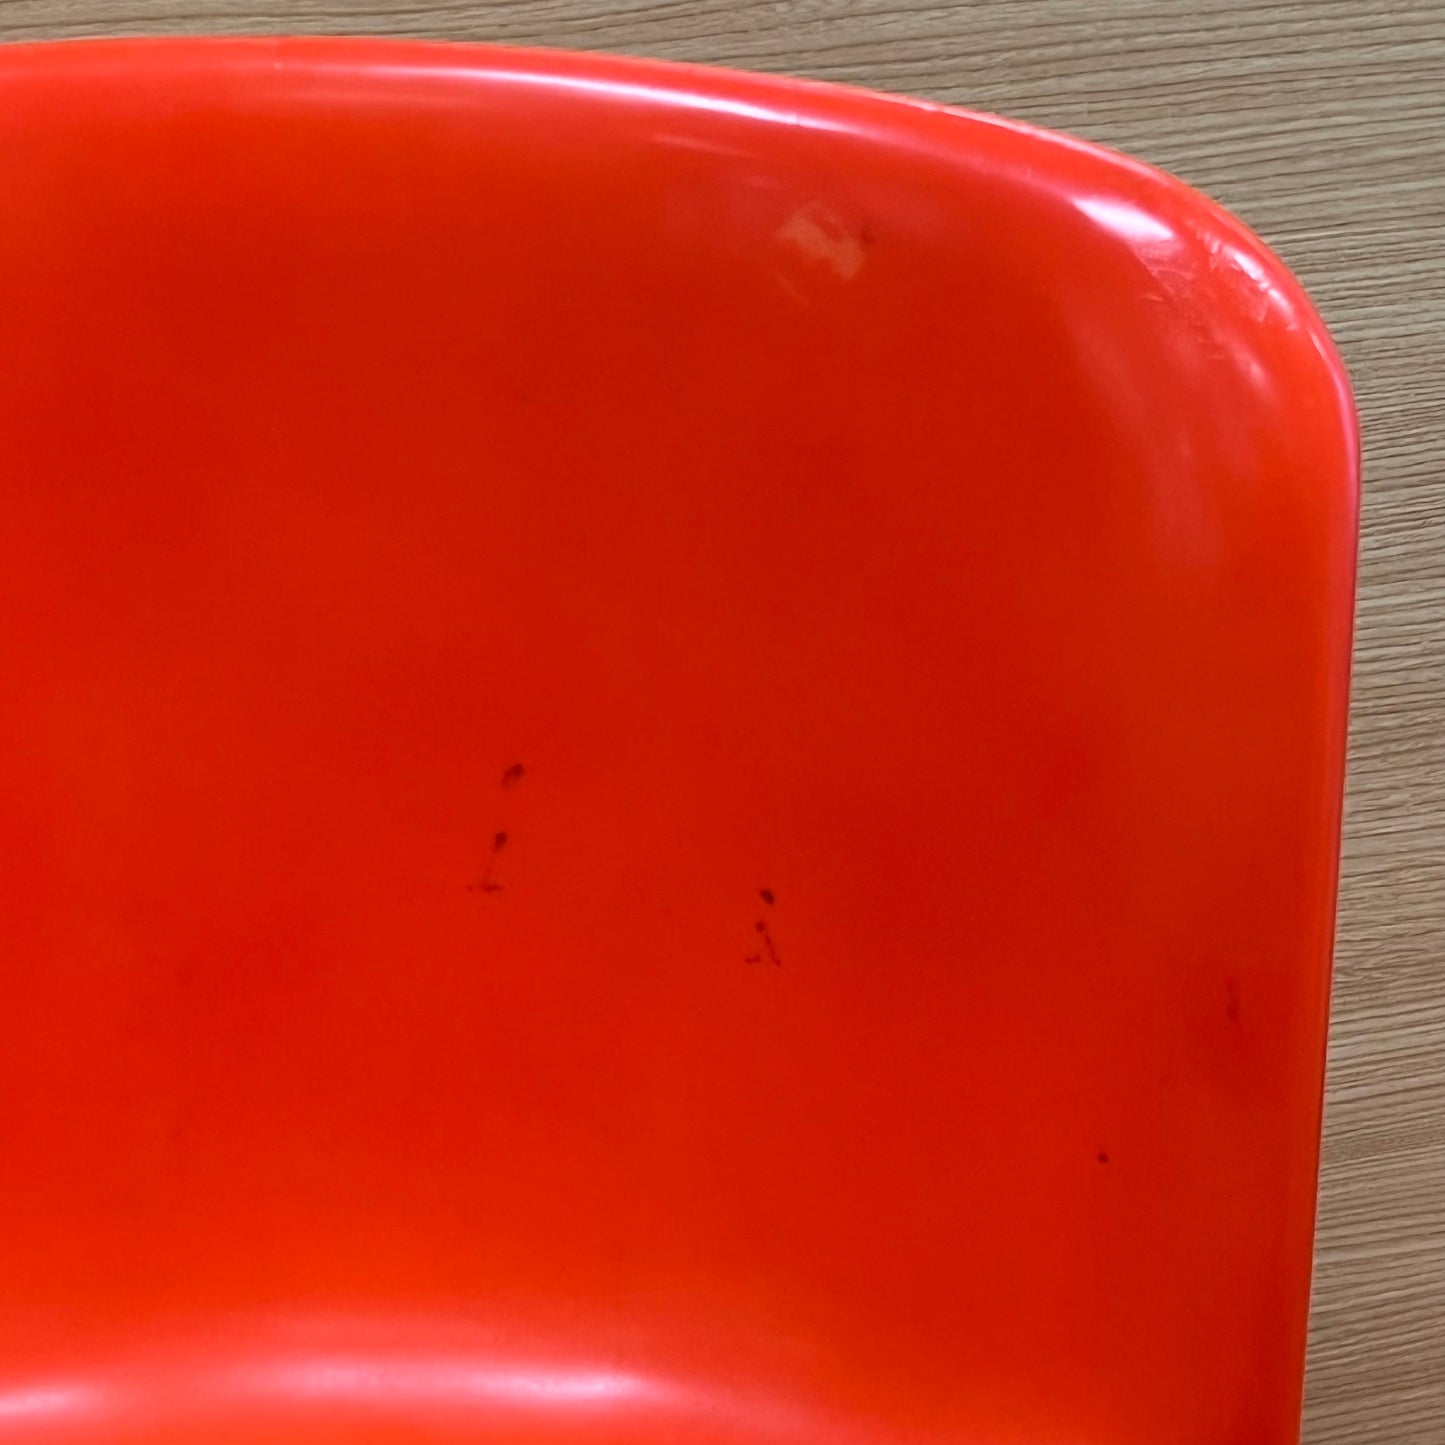 chair 2 has a small amount of paint missing and markings